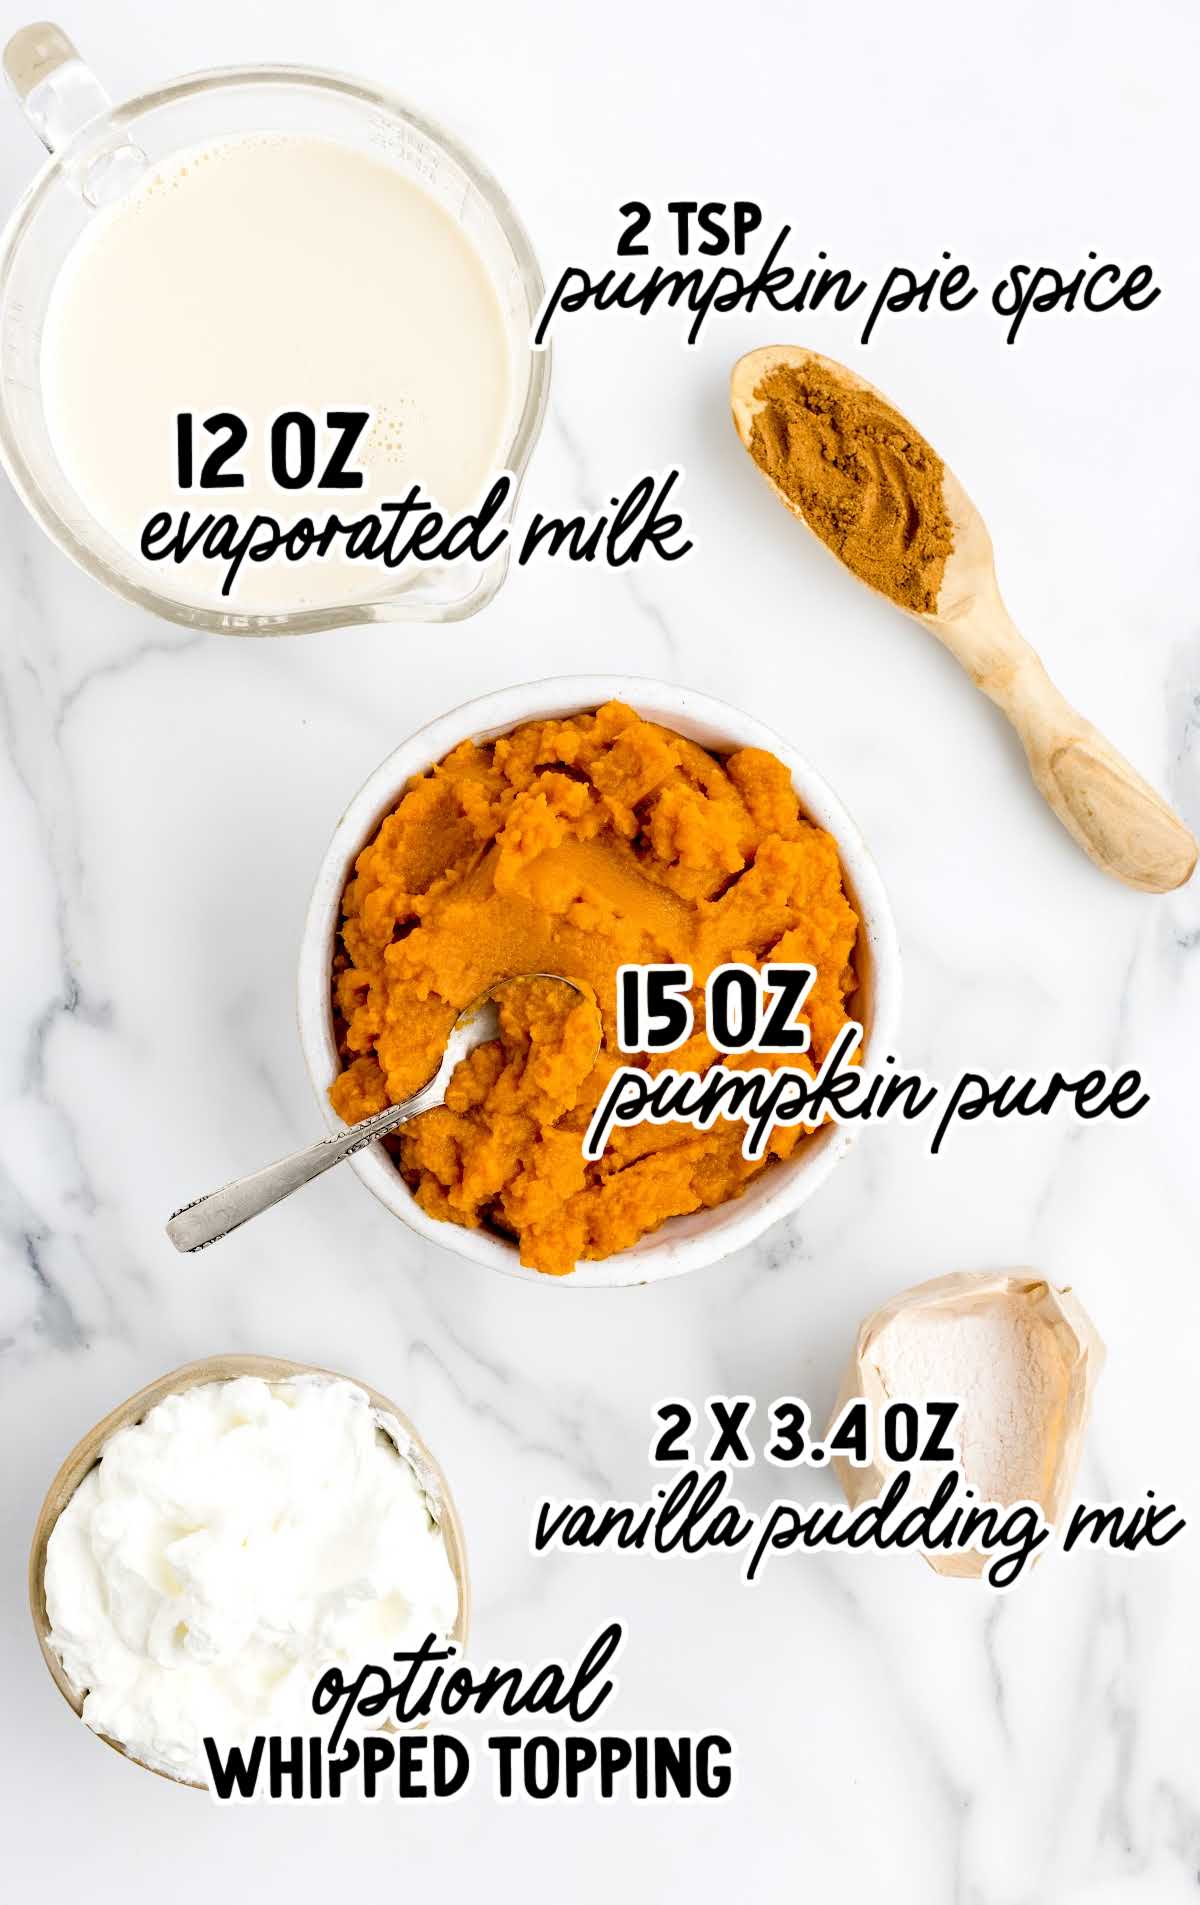 Pumpkin Pudding raw ingredients that are labeled